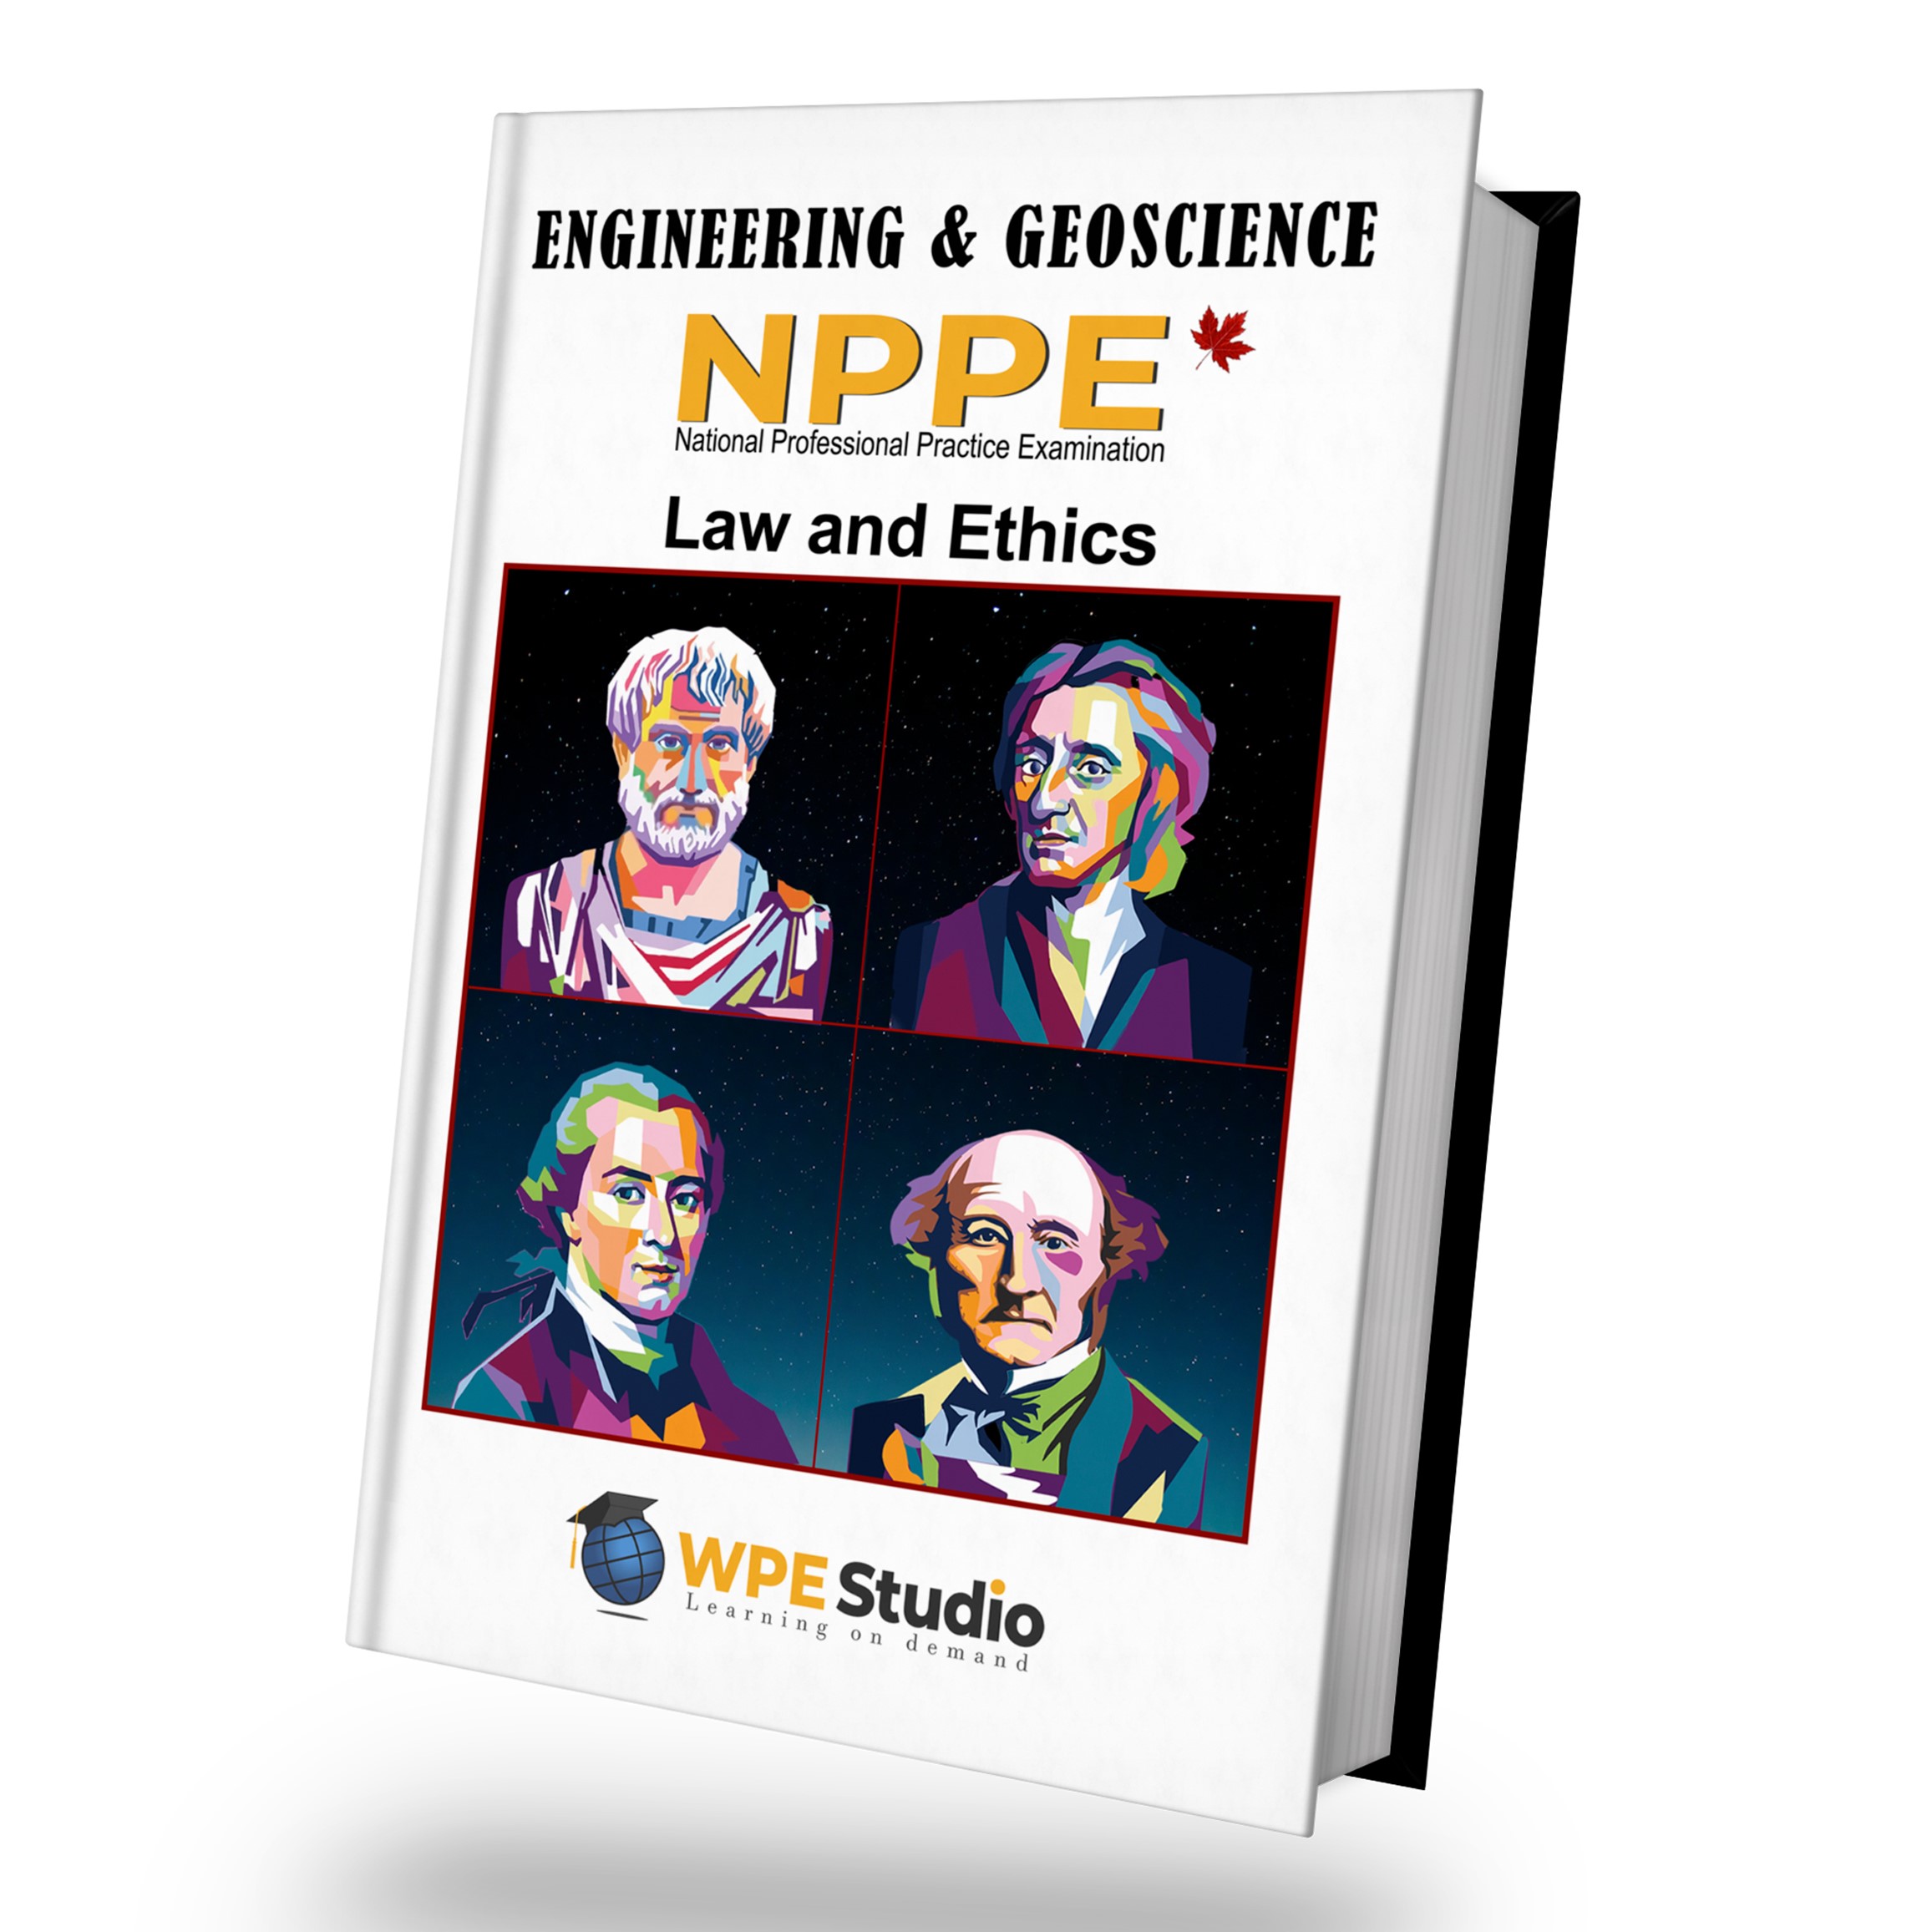 NPPE: Law and Ethics